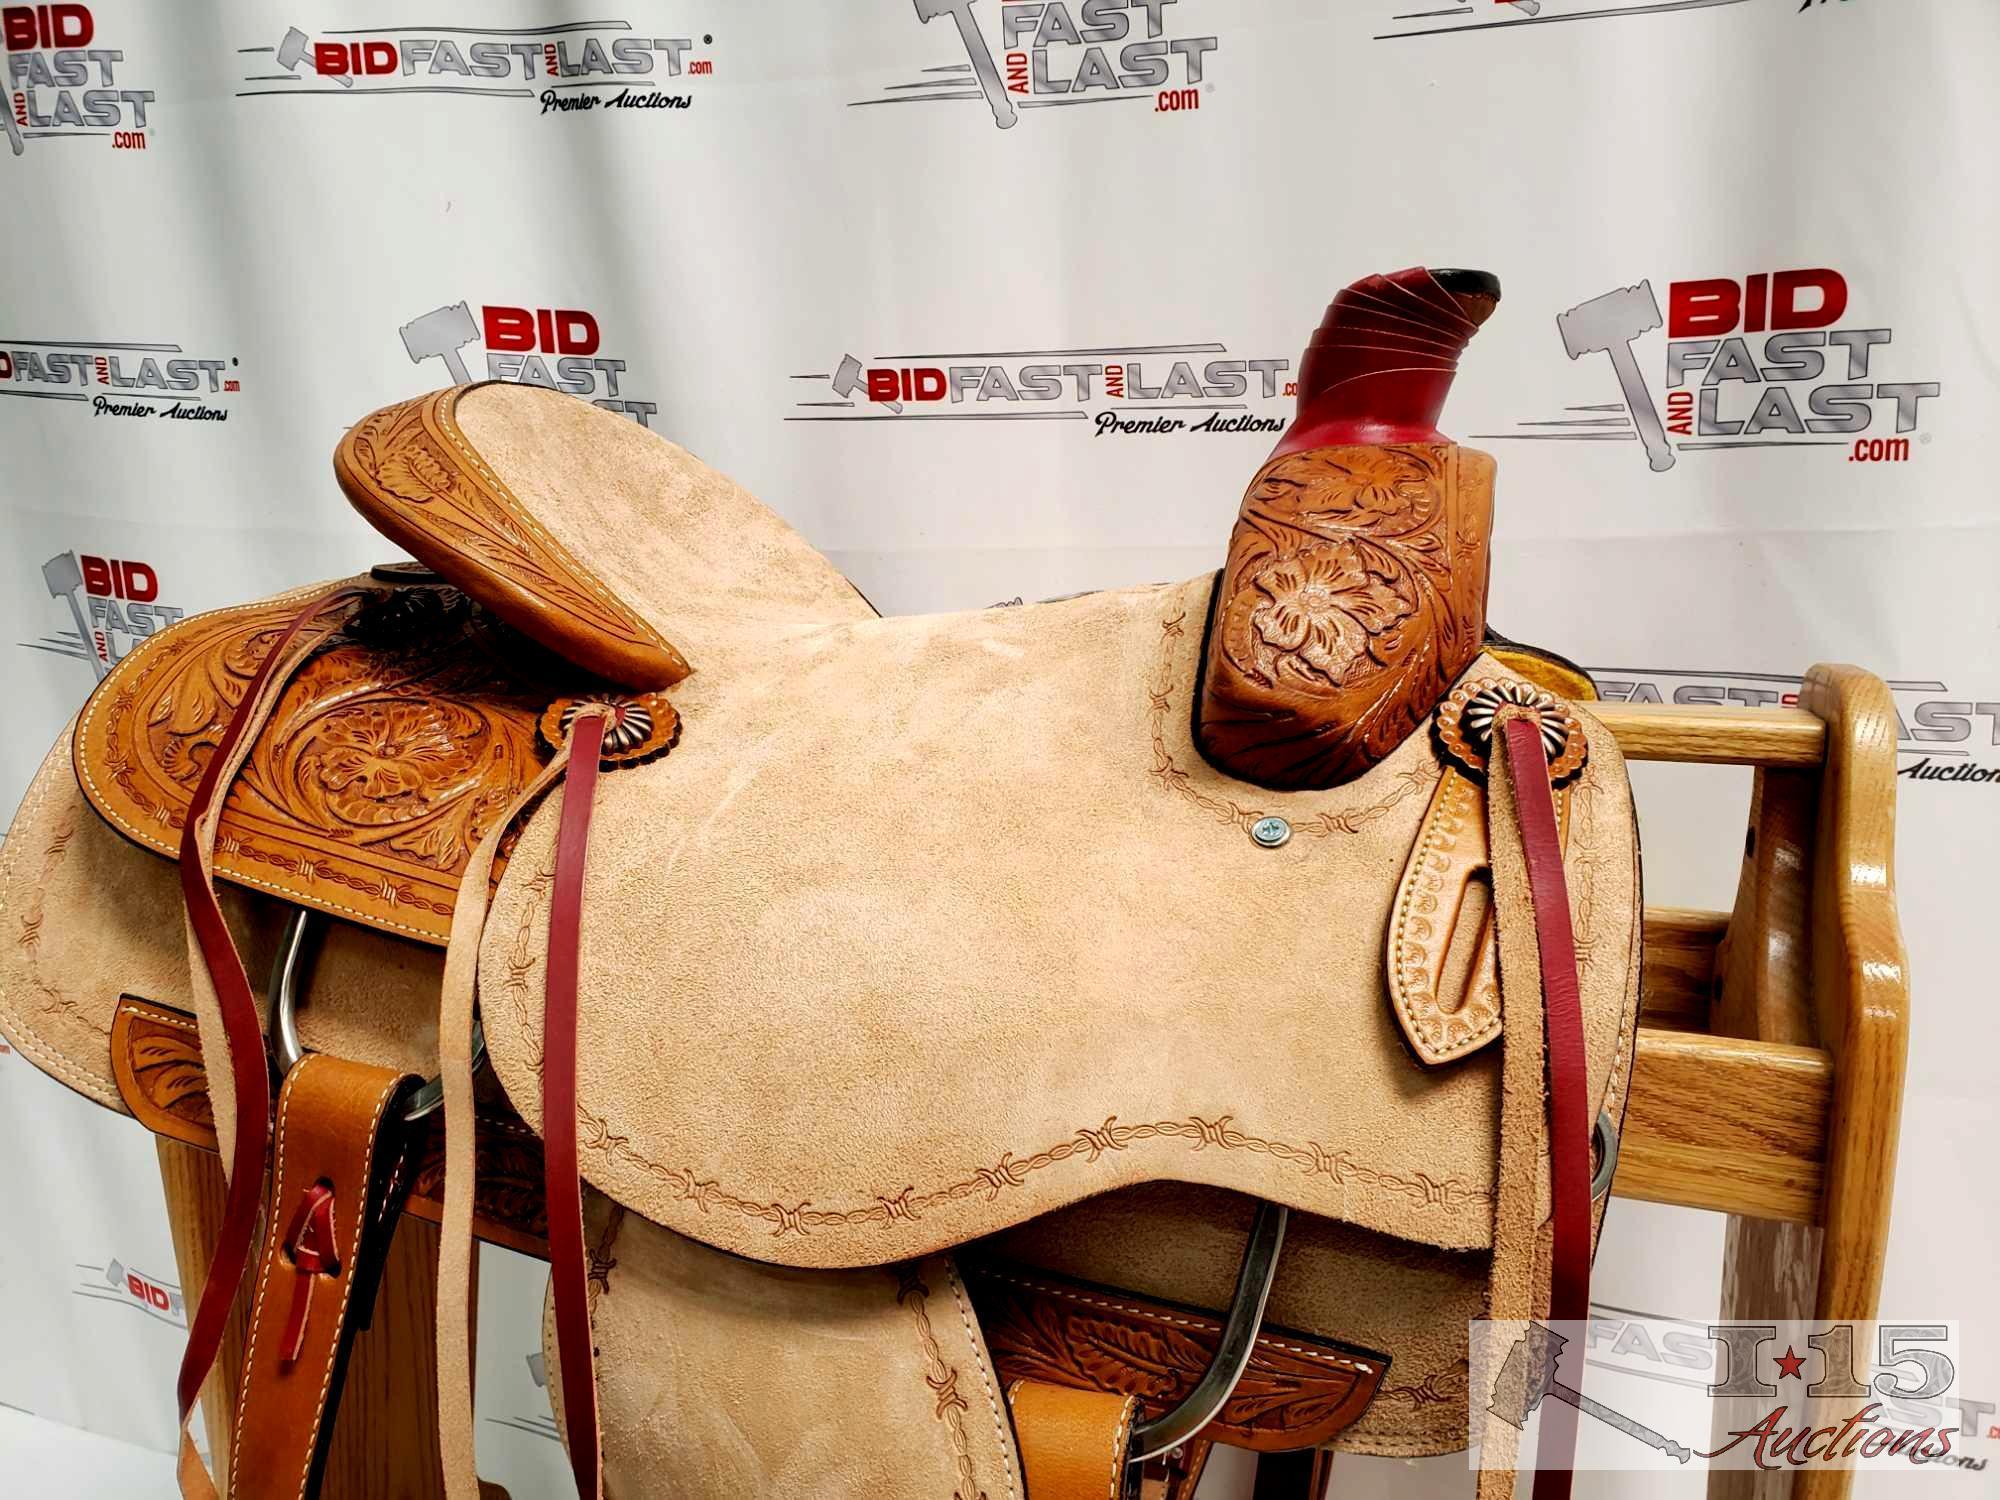 NEW 15" Circle S Roping Saddle with Roughout Seat. Warranted for Roping